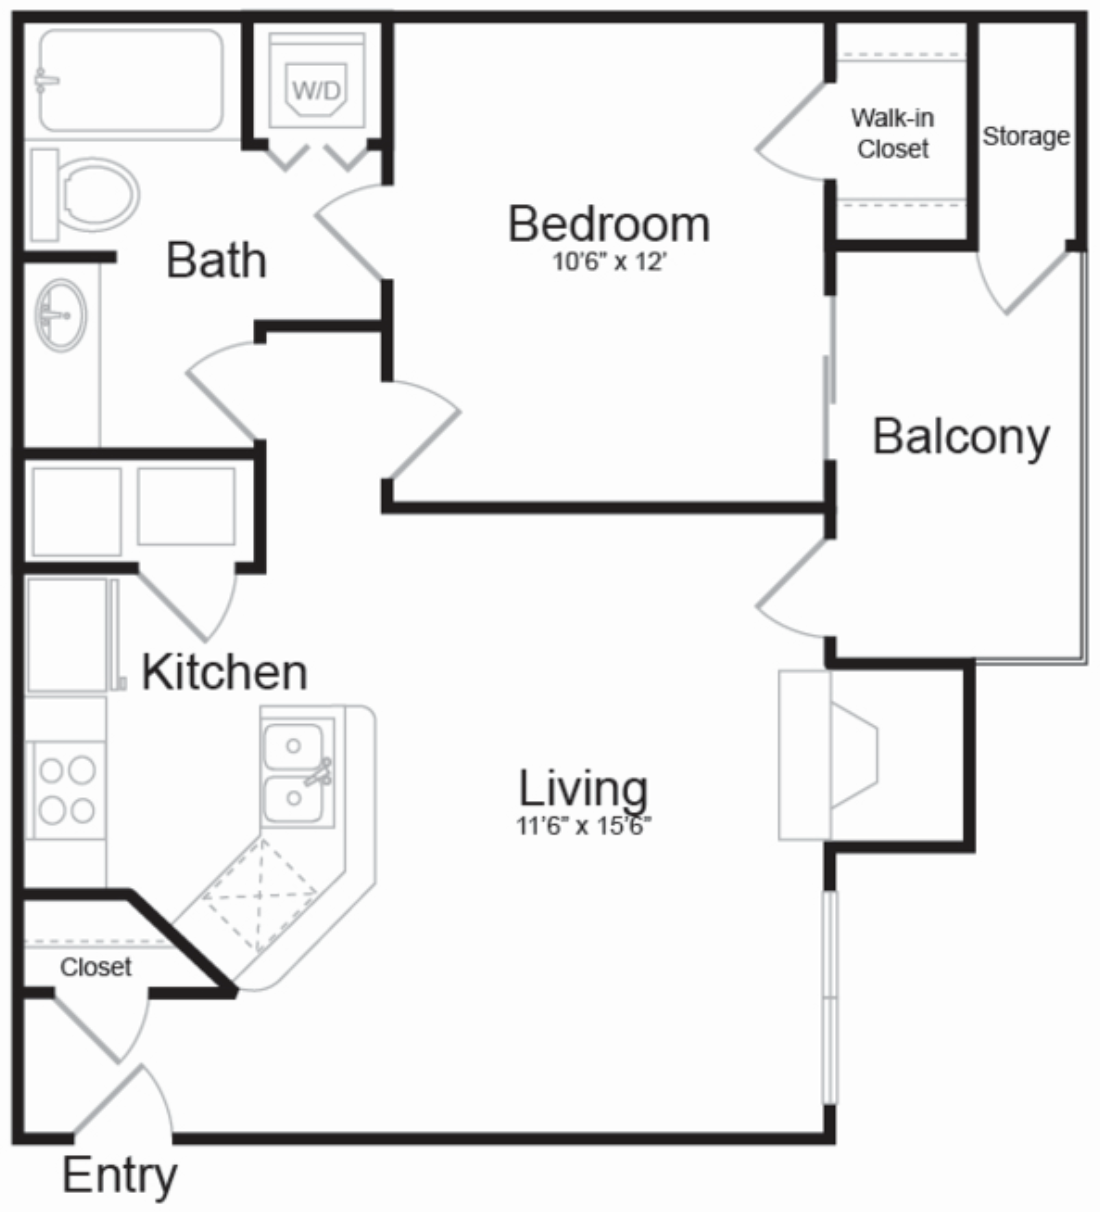 Apartment layout showing birdseye view of accessories